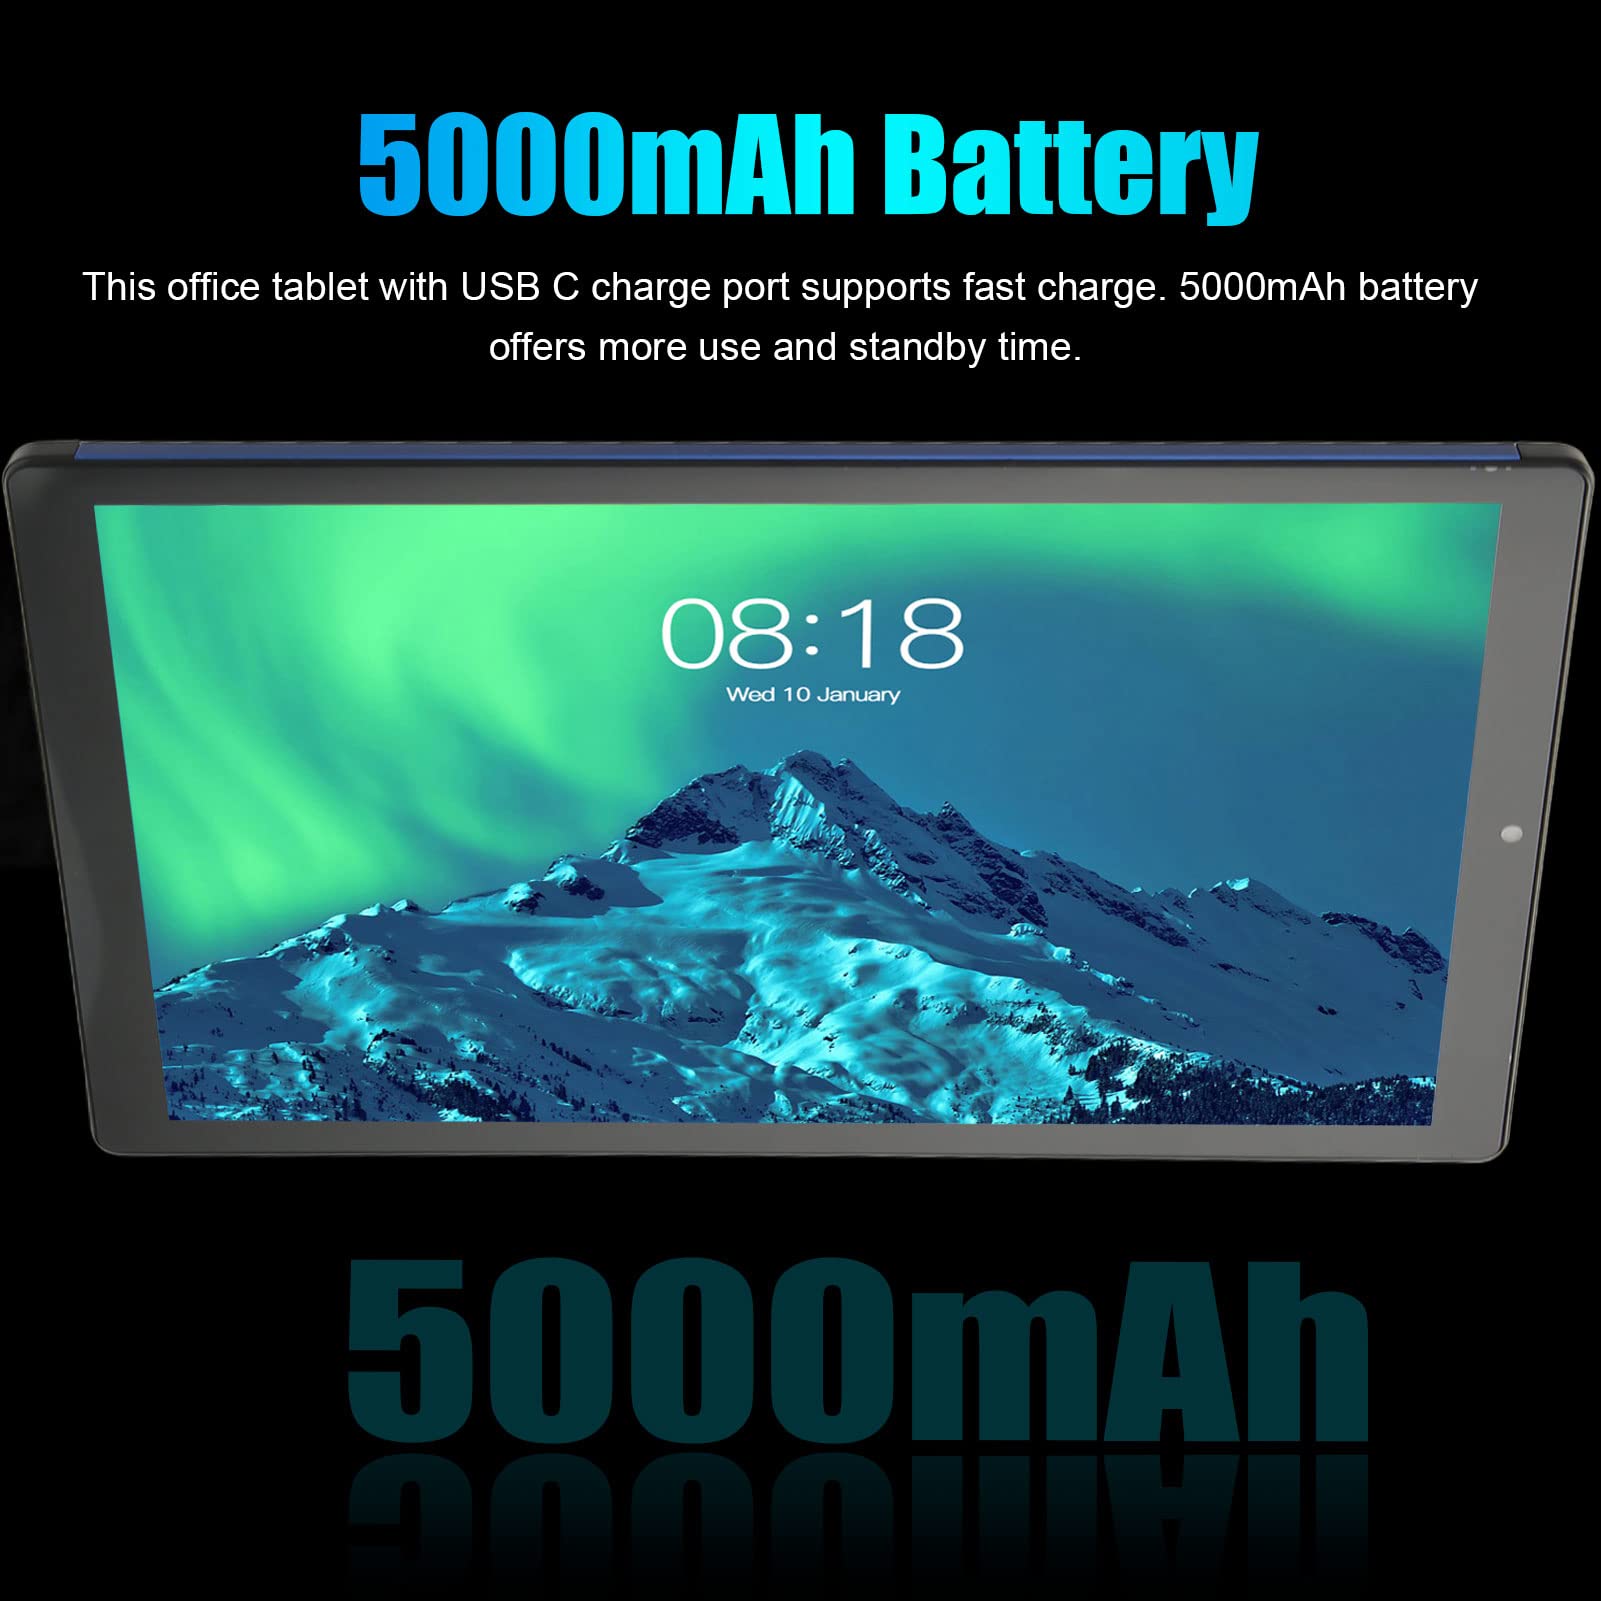 Zopsc 10 Inch Tablet, HD IPS Tablet with Octa Core CPU, 4GB+64GB, 128GB Expandable, 5MP+8MP Dual Camera, 5000mAh Battery, Supports 3G Network and 5G WiFi, Blue (US Plug)